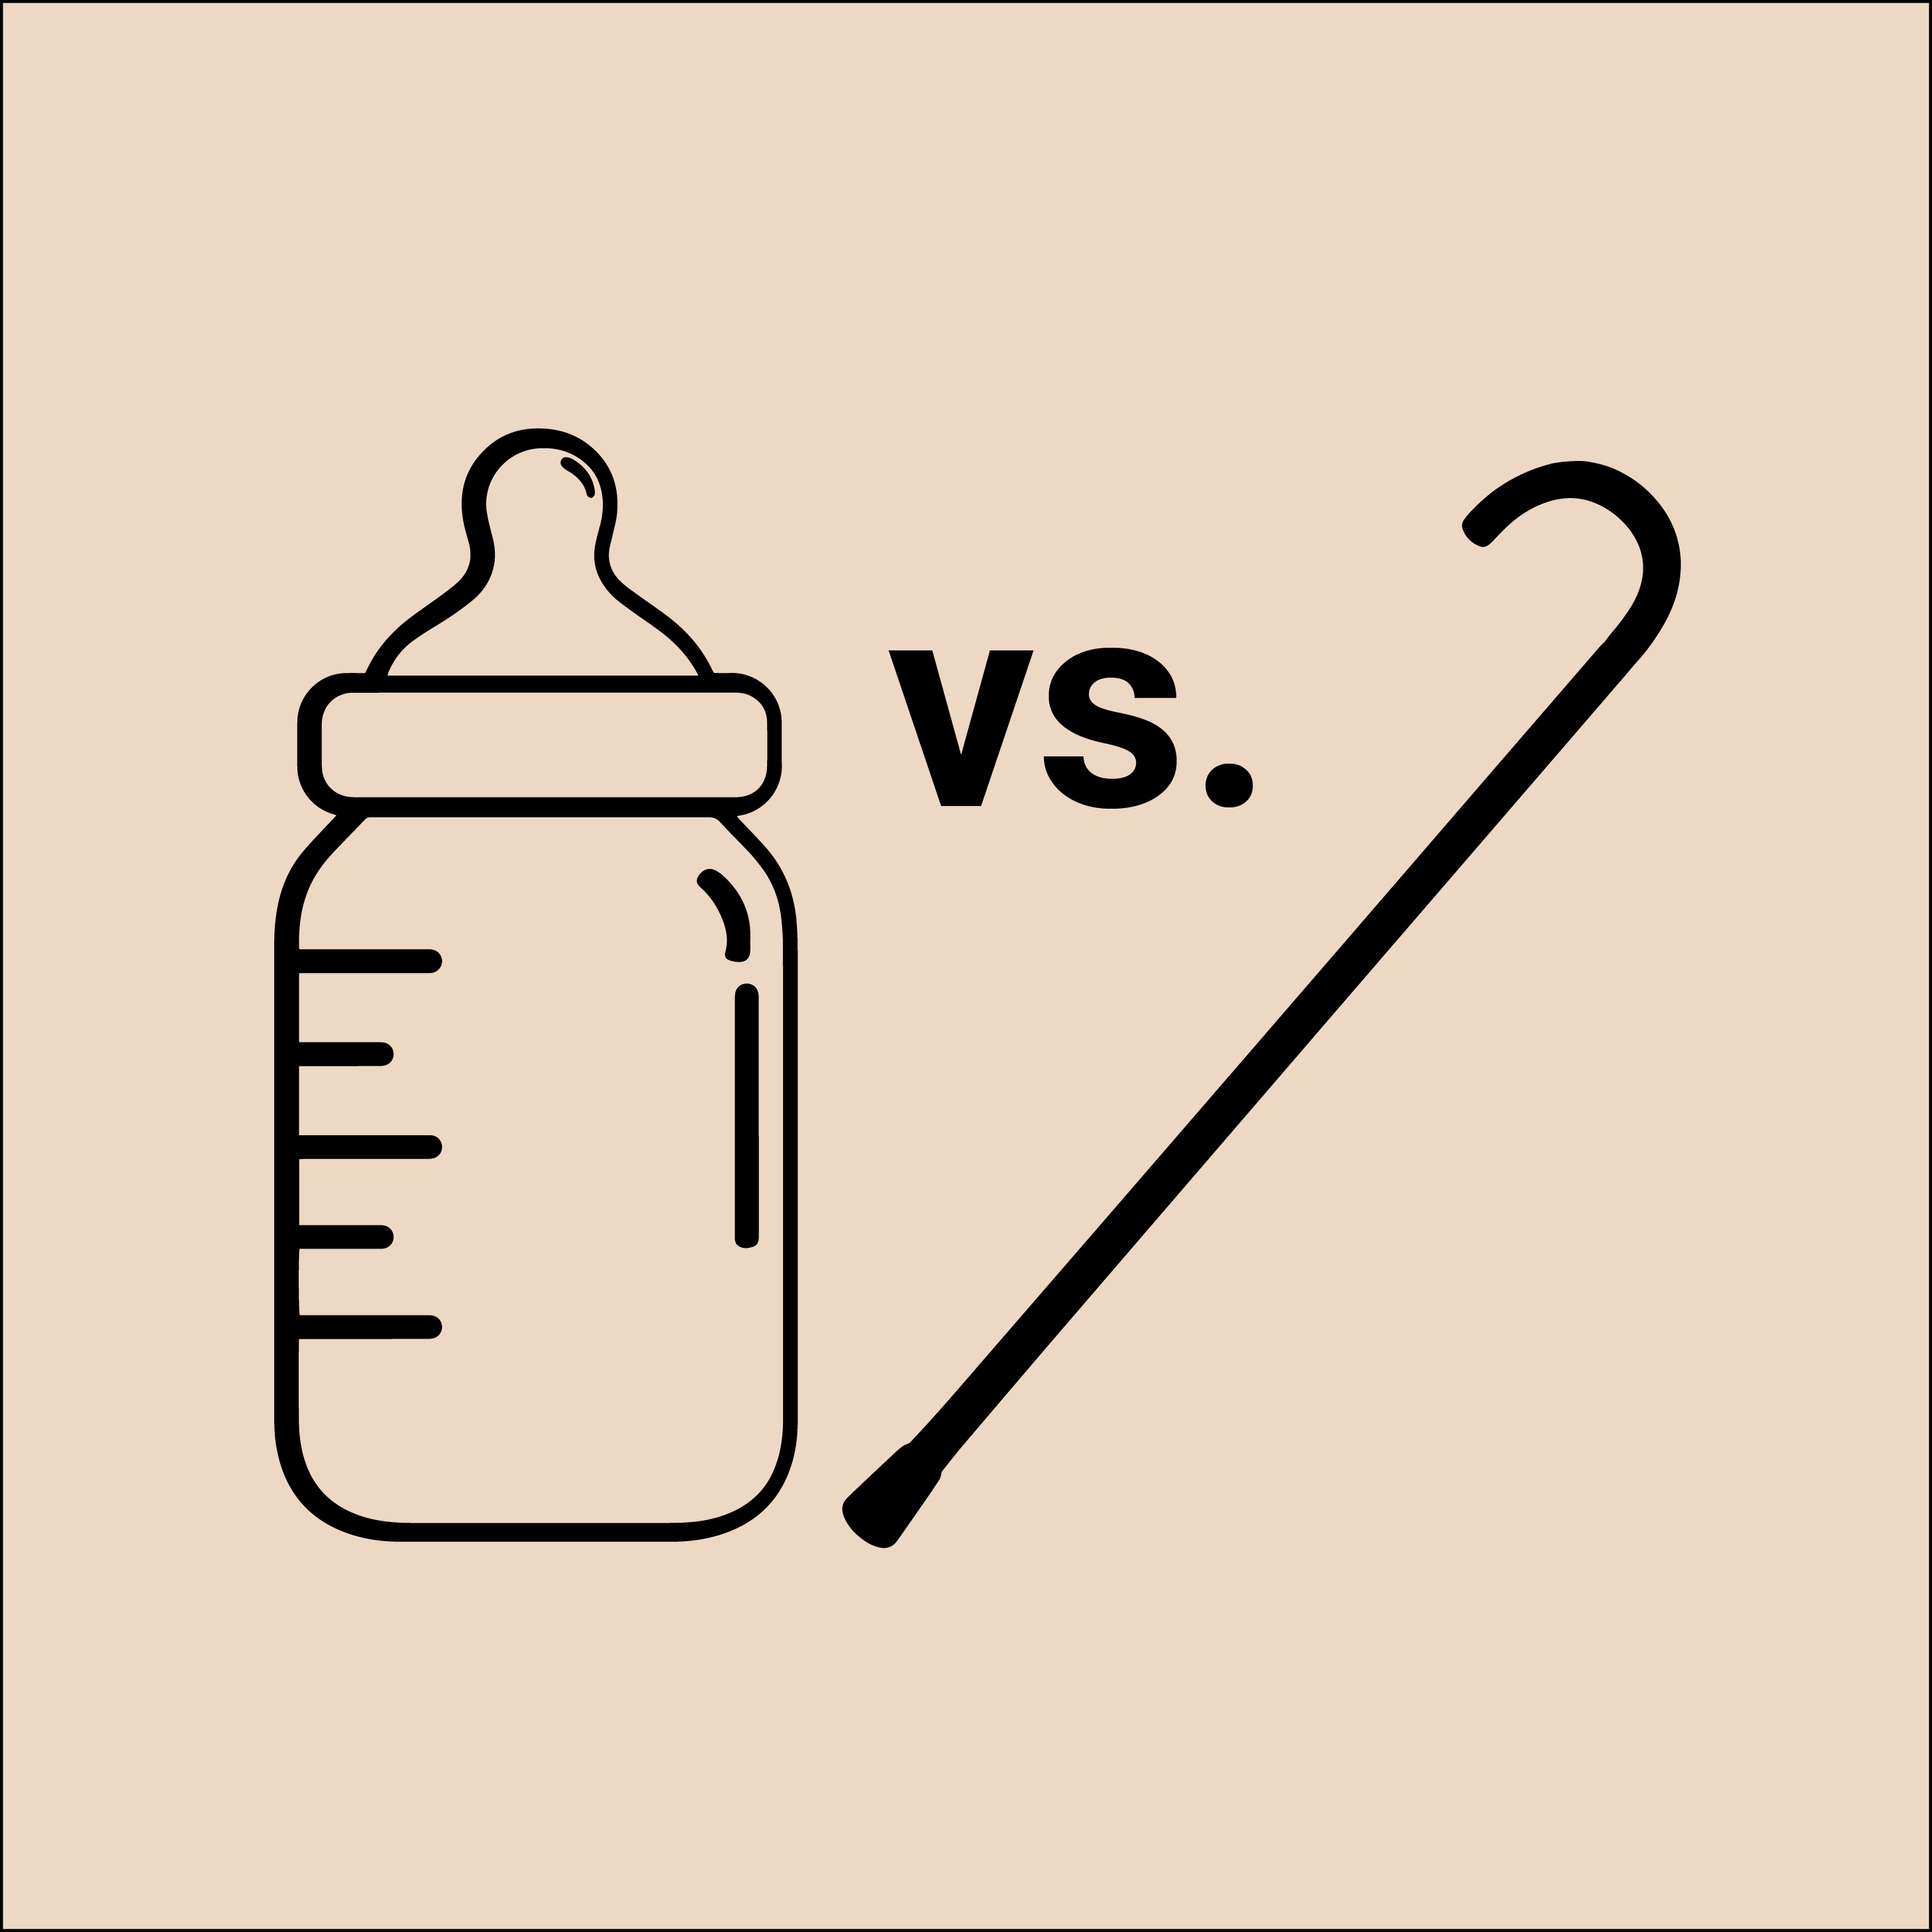 A baby bottle next to a cane with 'vs.' witten in the middle to illustrate age differences.